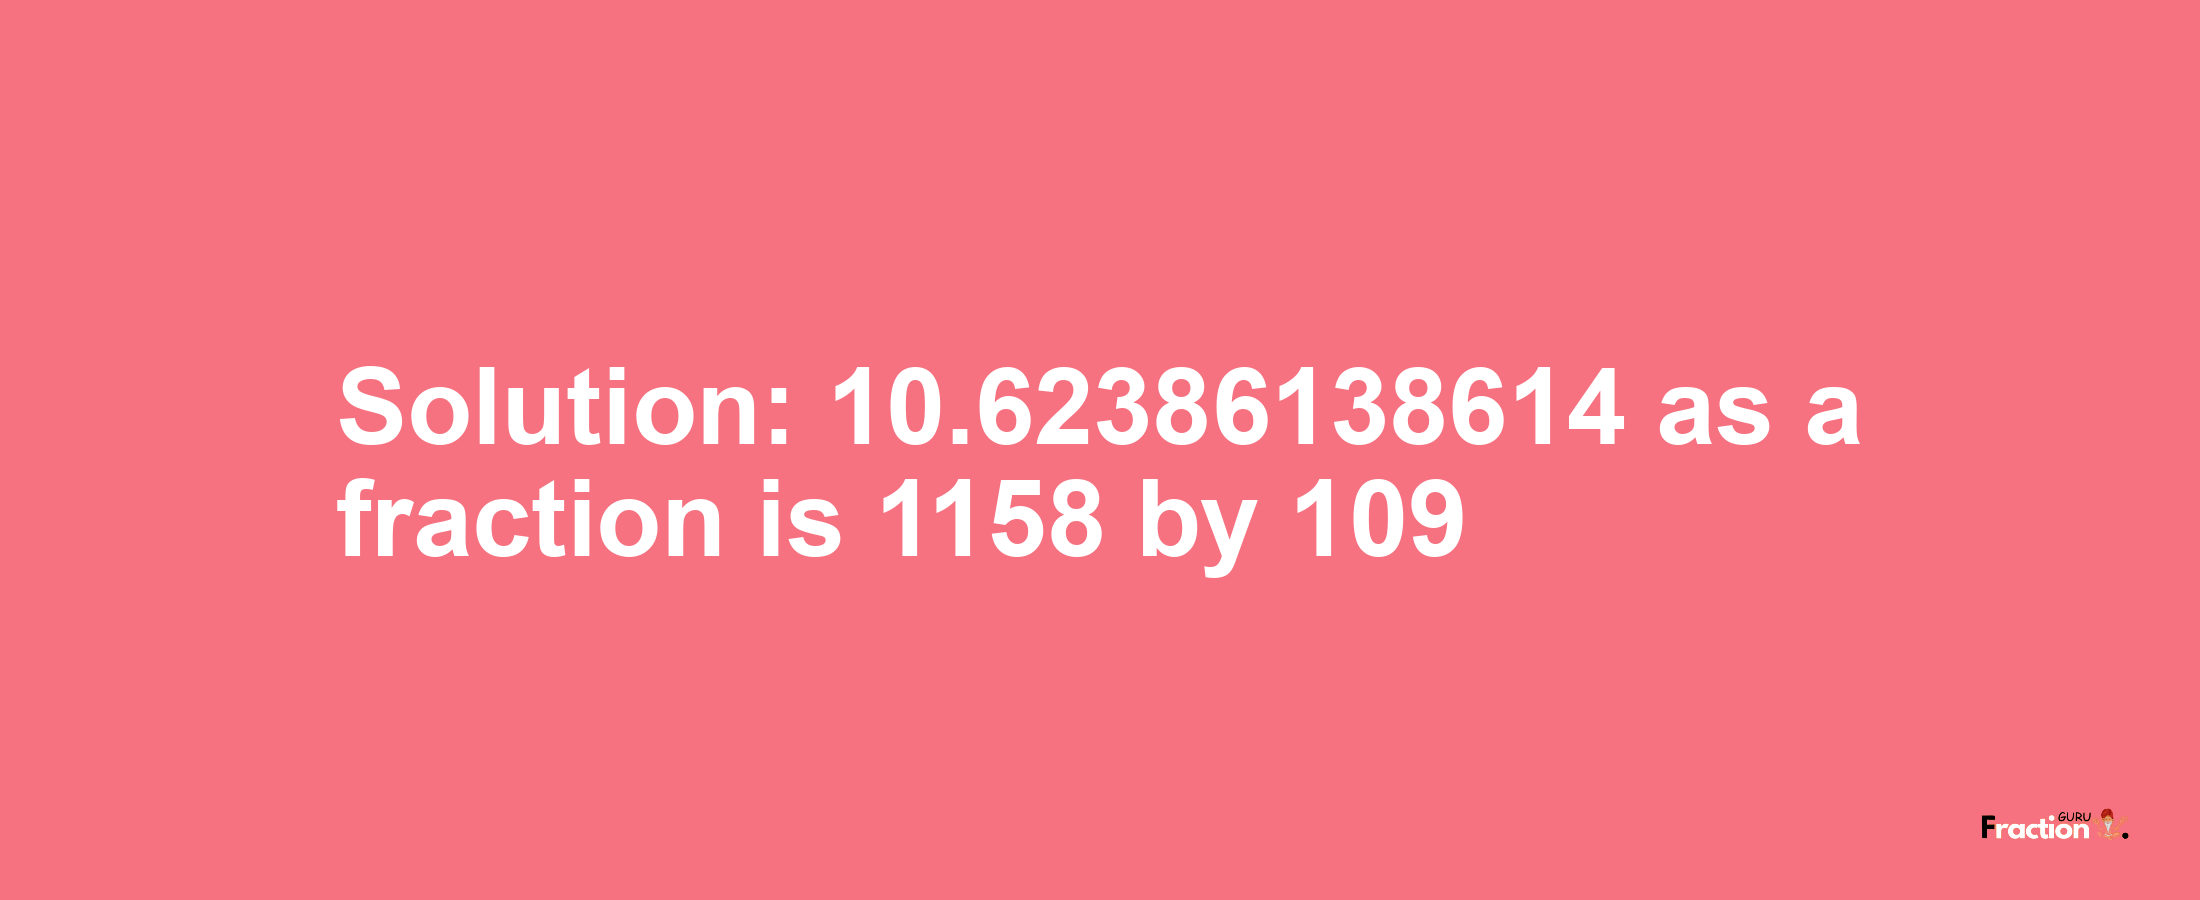 Solution:10.62386138614 as a fraction is 1158/109